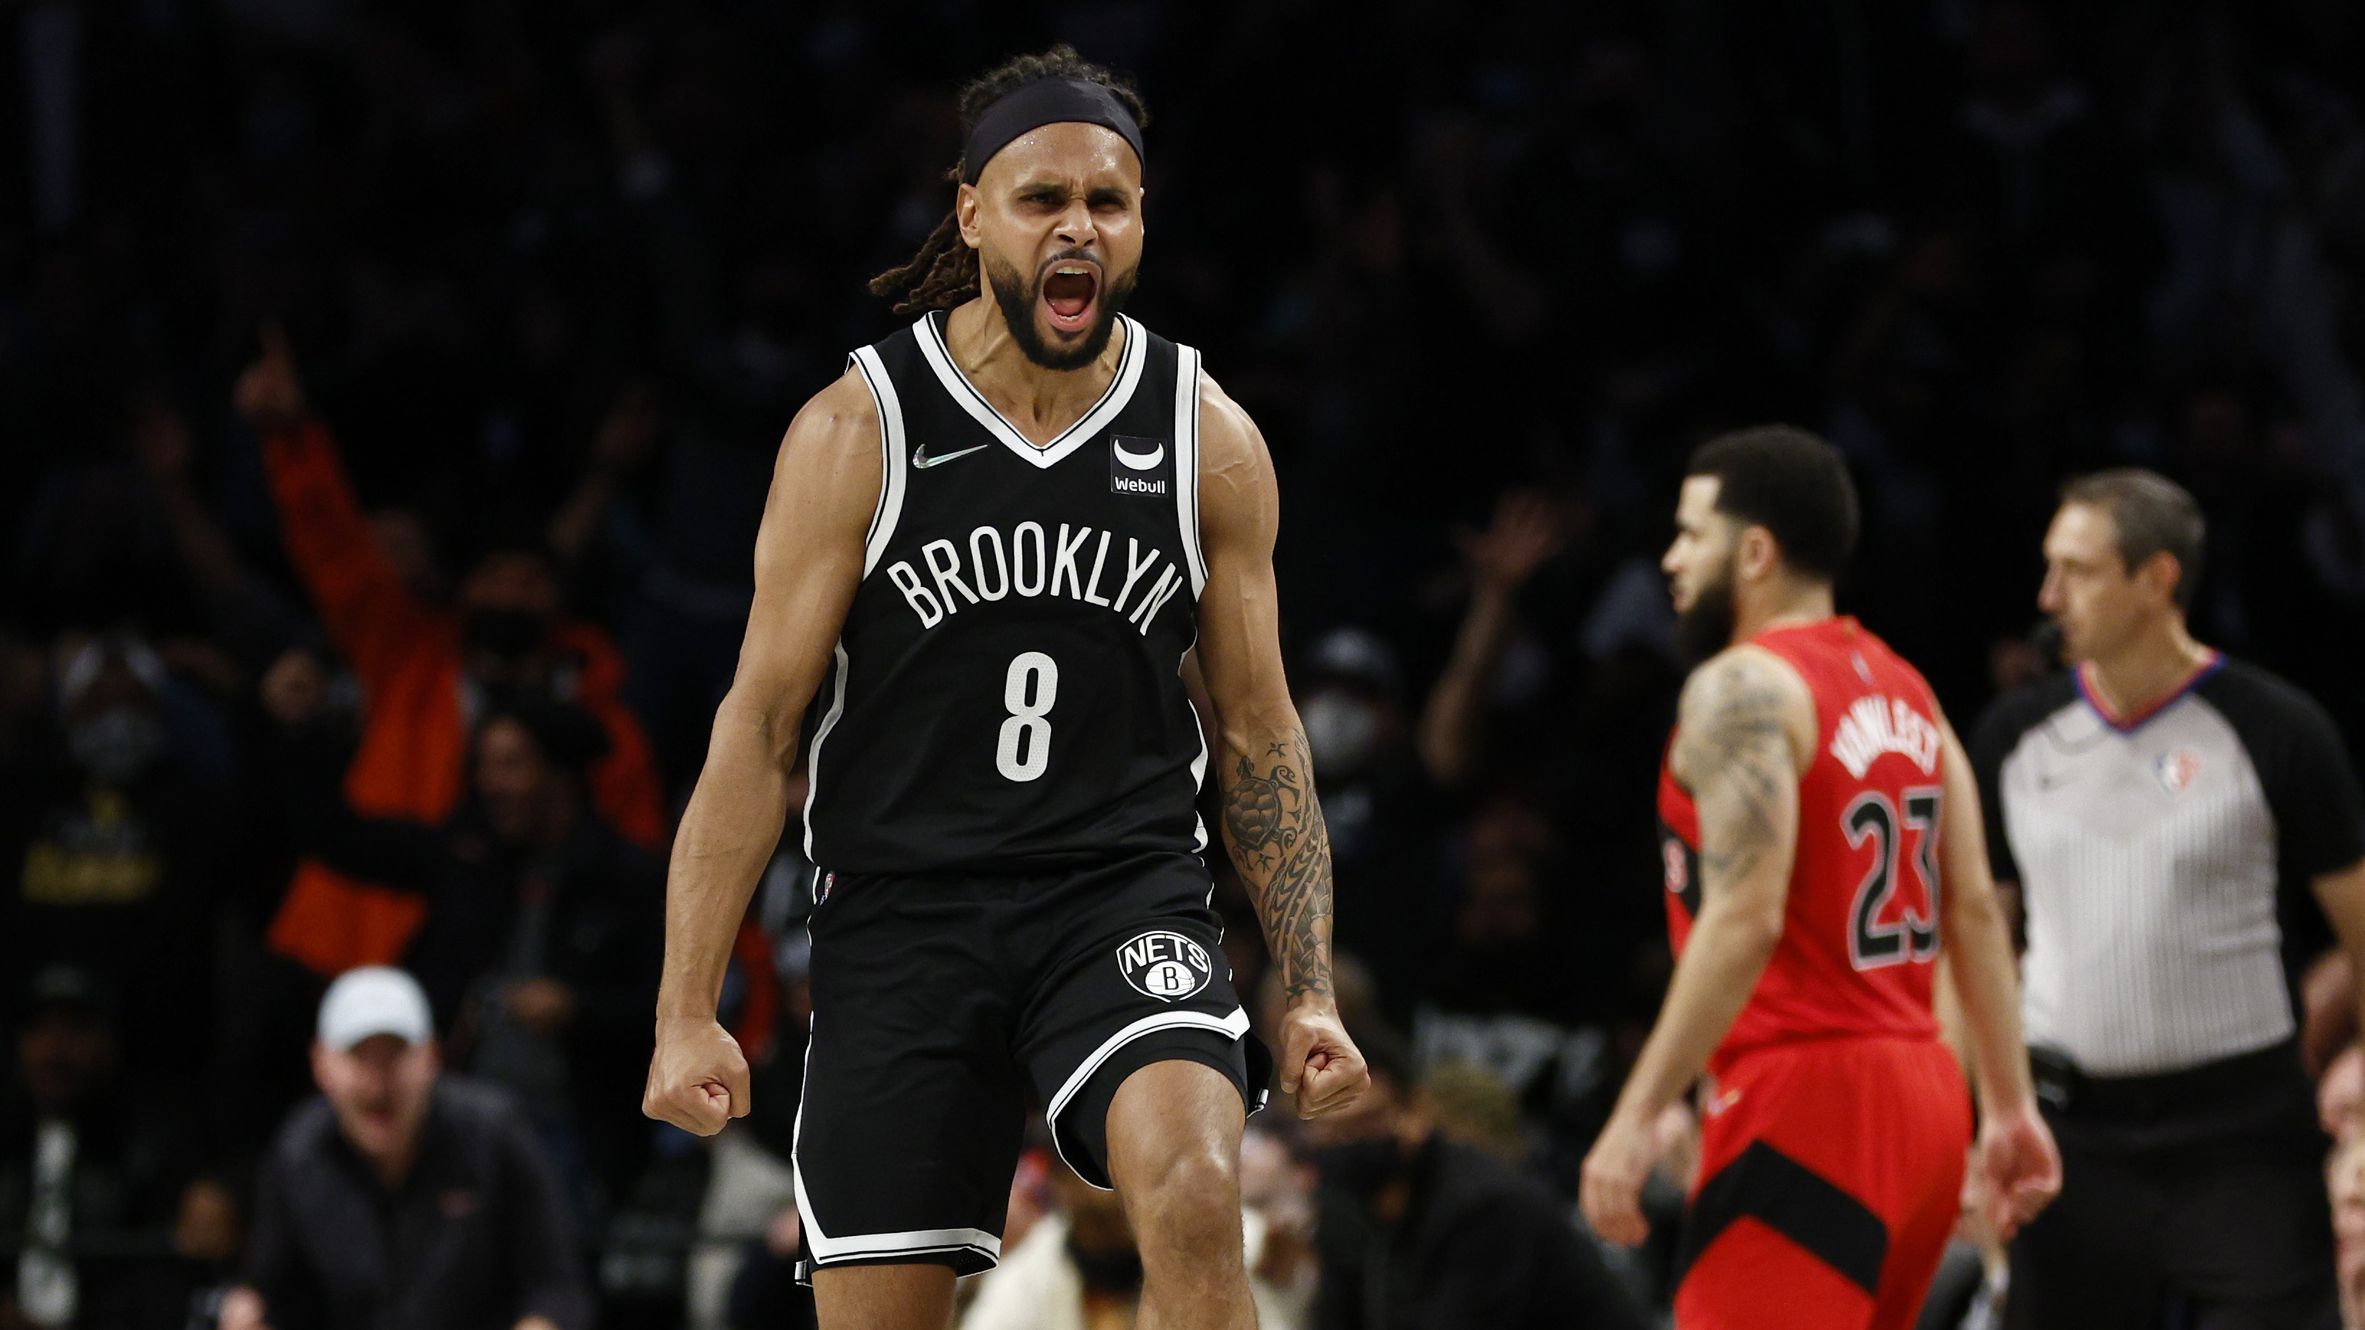 Patty Mills of the Brooklyn Nets reacts after making a three-pointer against the Toronto Raptors.